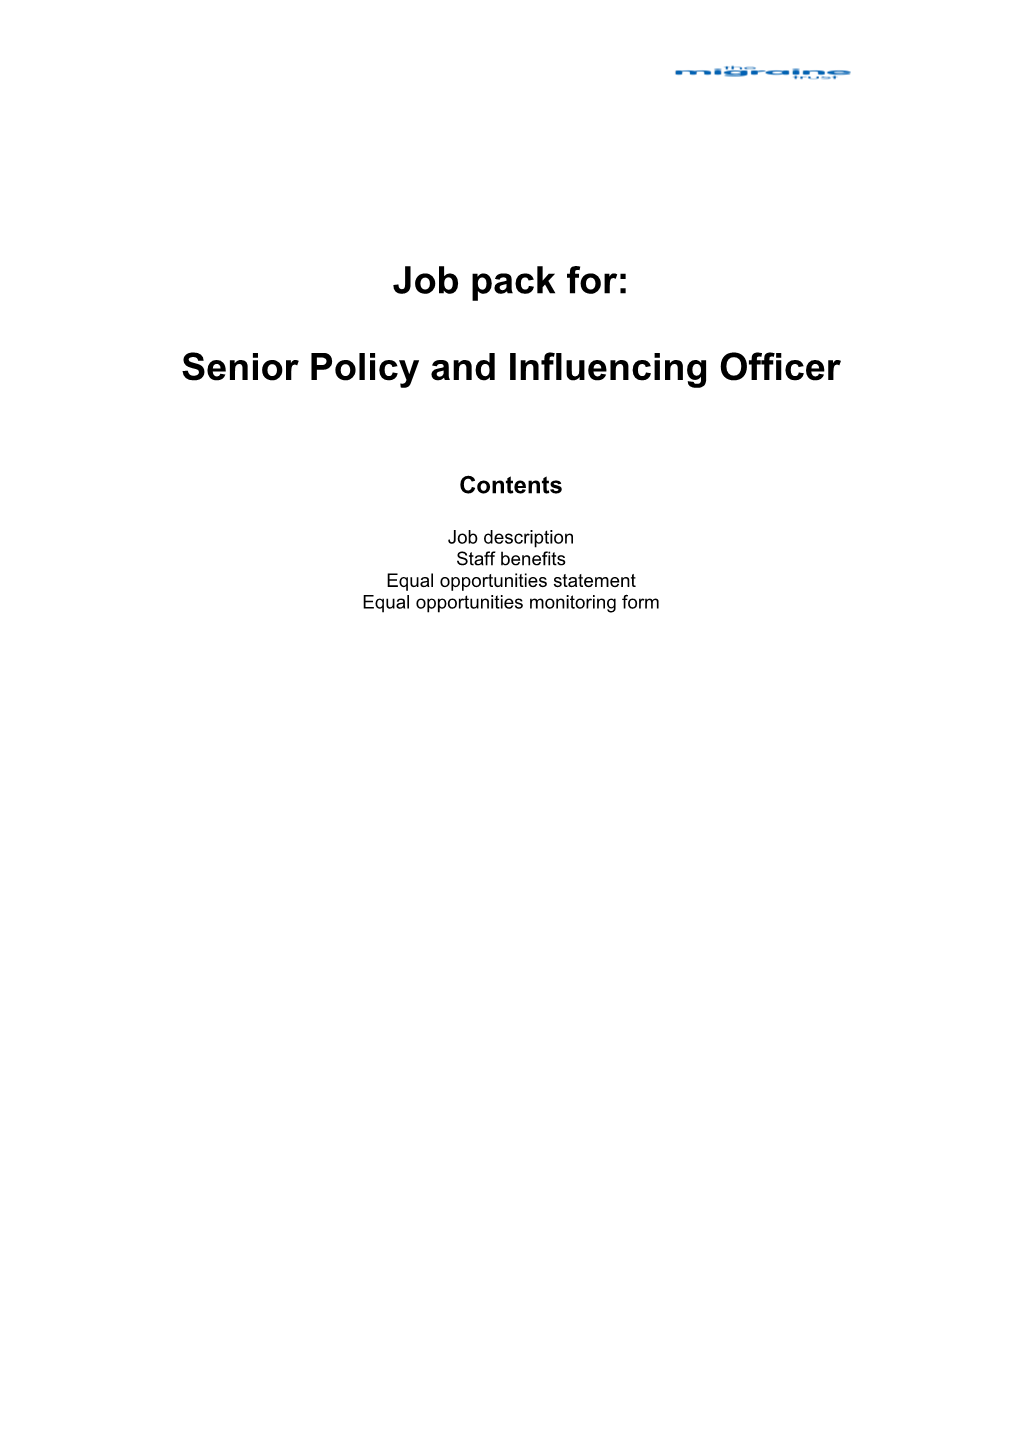 Senior Policy and Influencing Officer